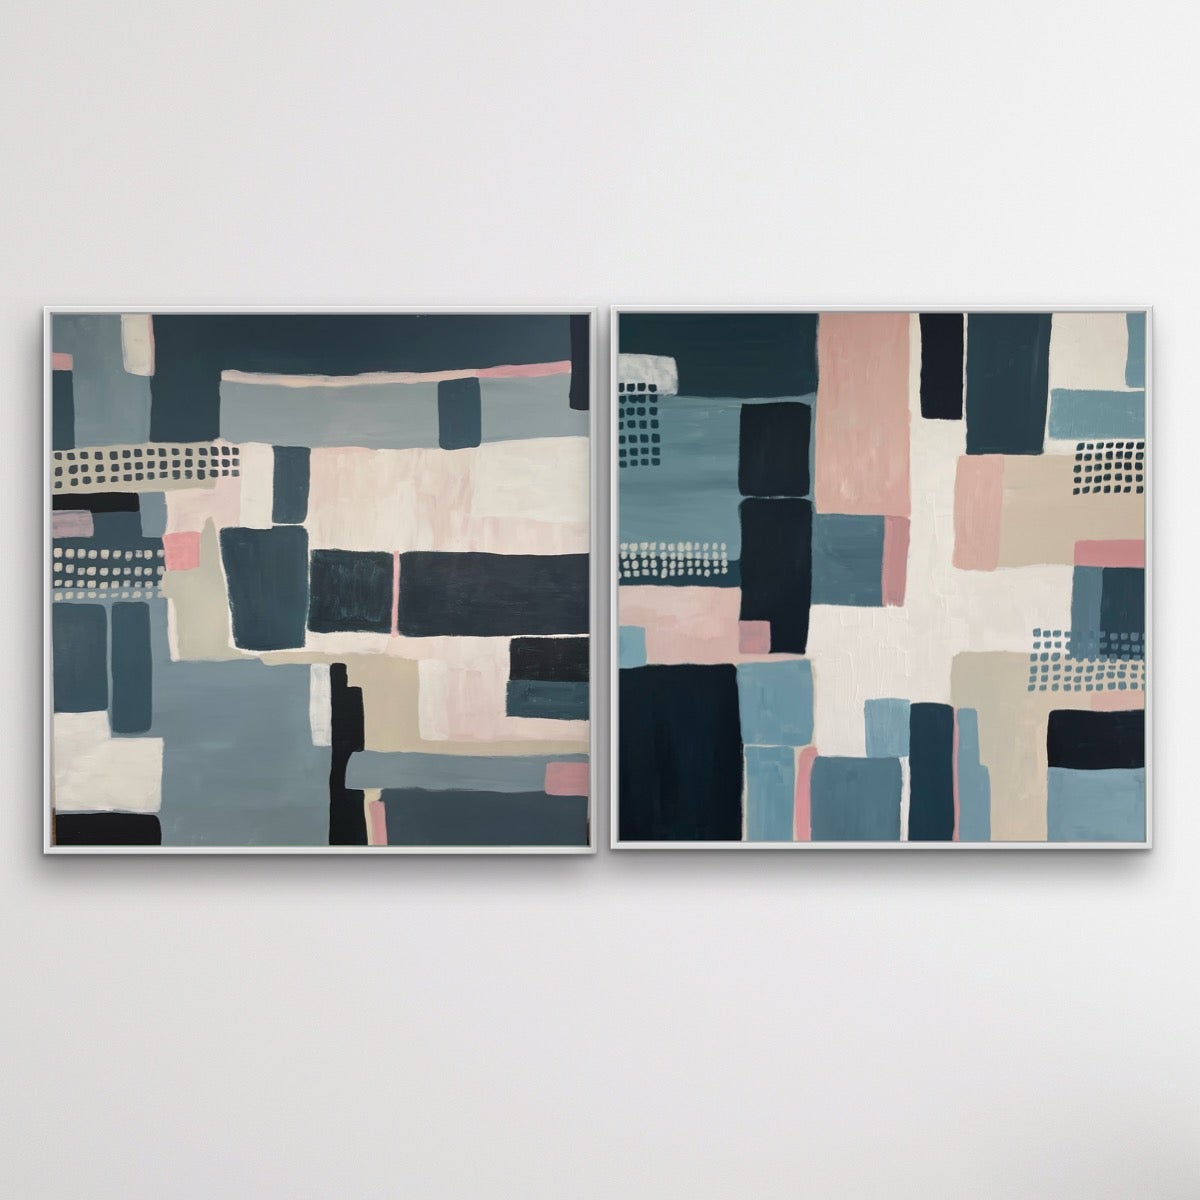 Fleur park Abstract Painting - Field Patterns Diptych Acrylic on Canvas Painting by Fleur Park, 2022